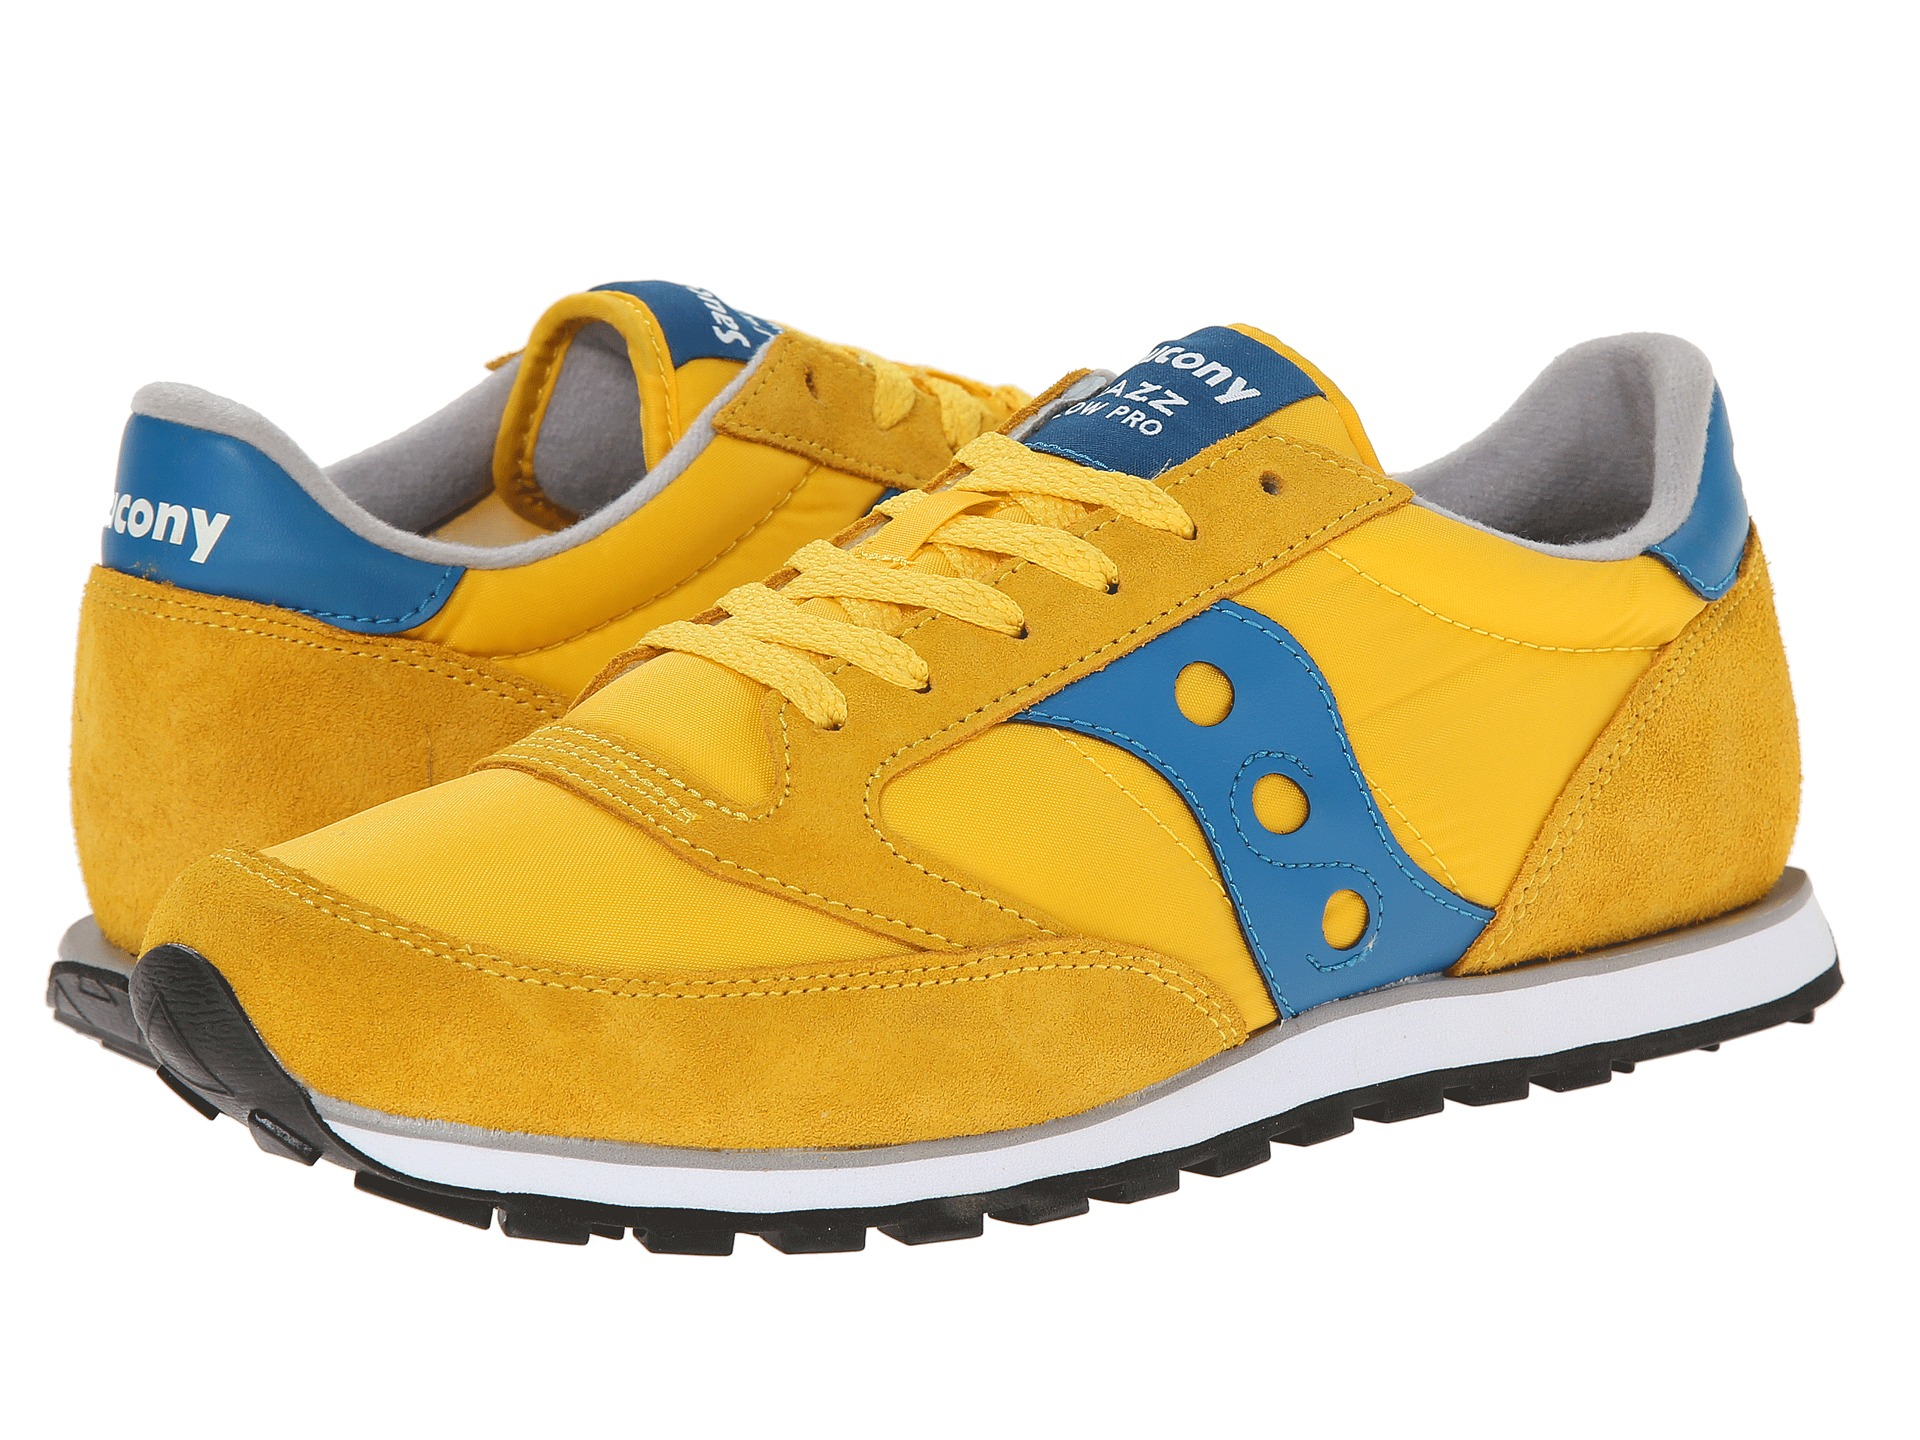 Saucony Jazz Low Pro in Yellow/Blue 